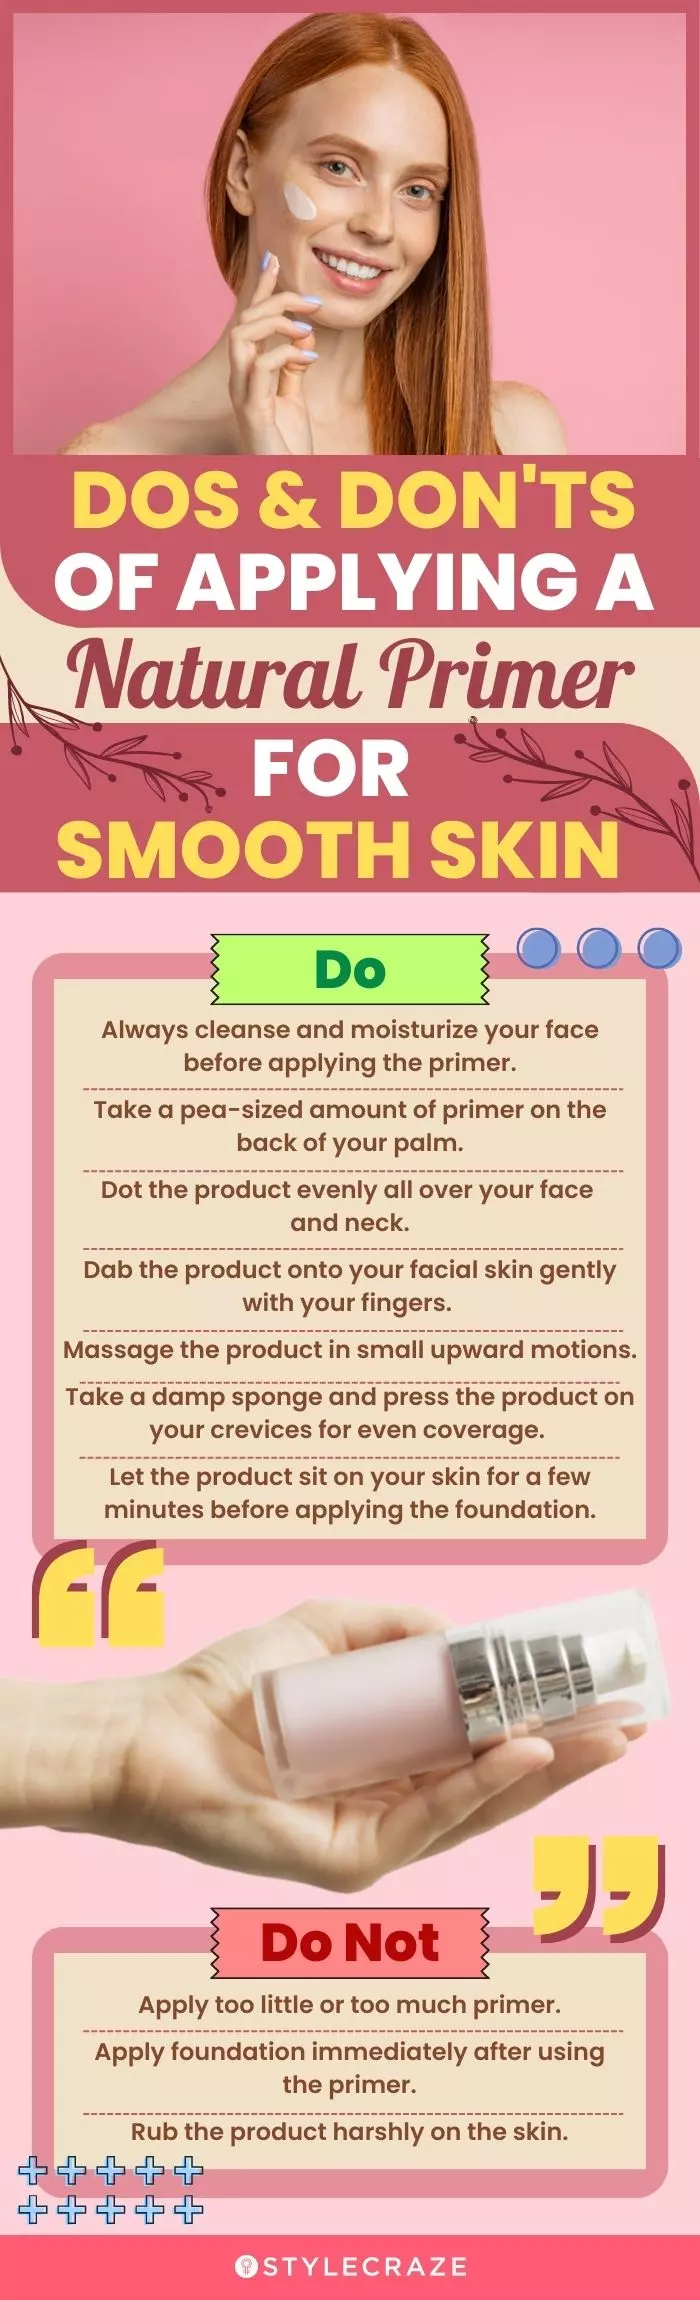 Dos & Don'ts Of Applying Natural Primer (infographic)